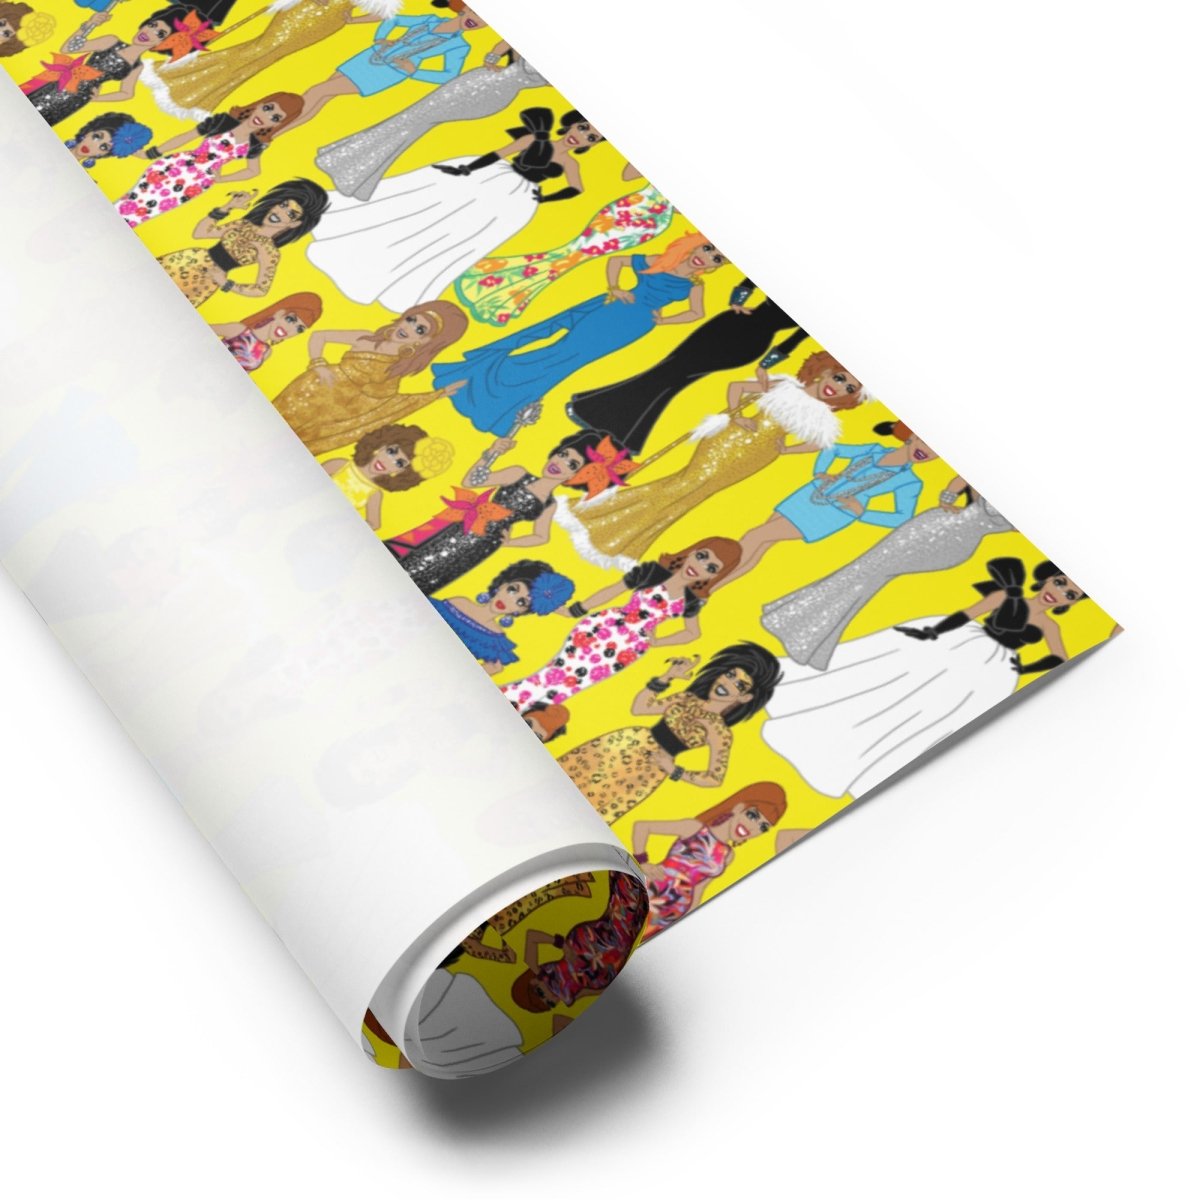 Bianca Del Rio - Collage Wrapping paper sheets - dragqueenmerch